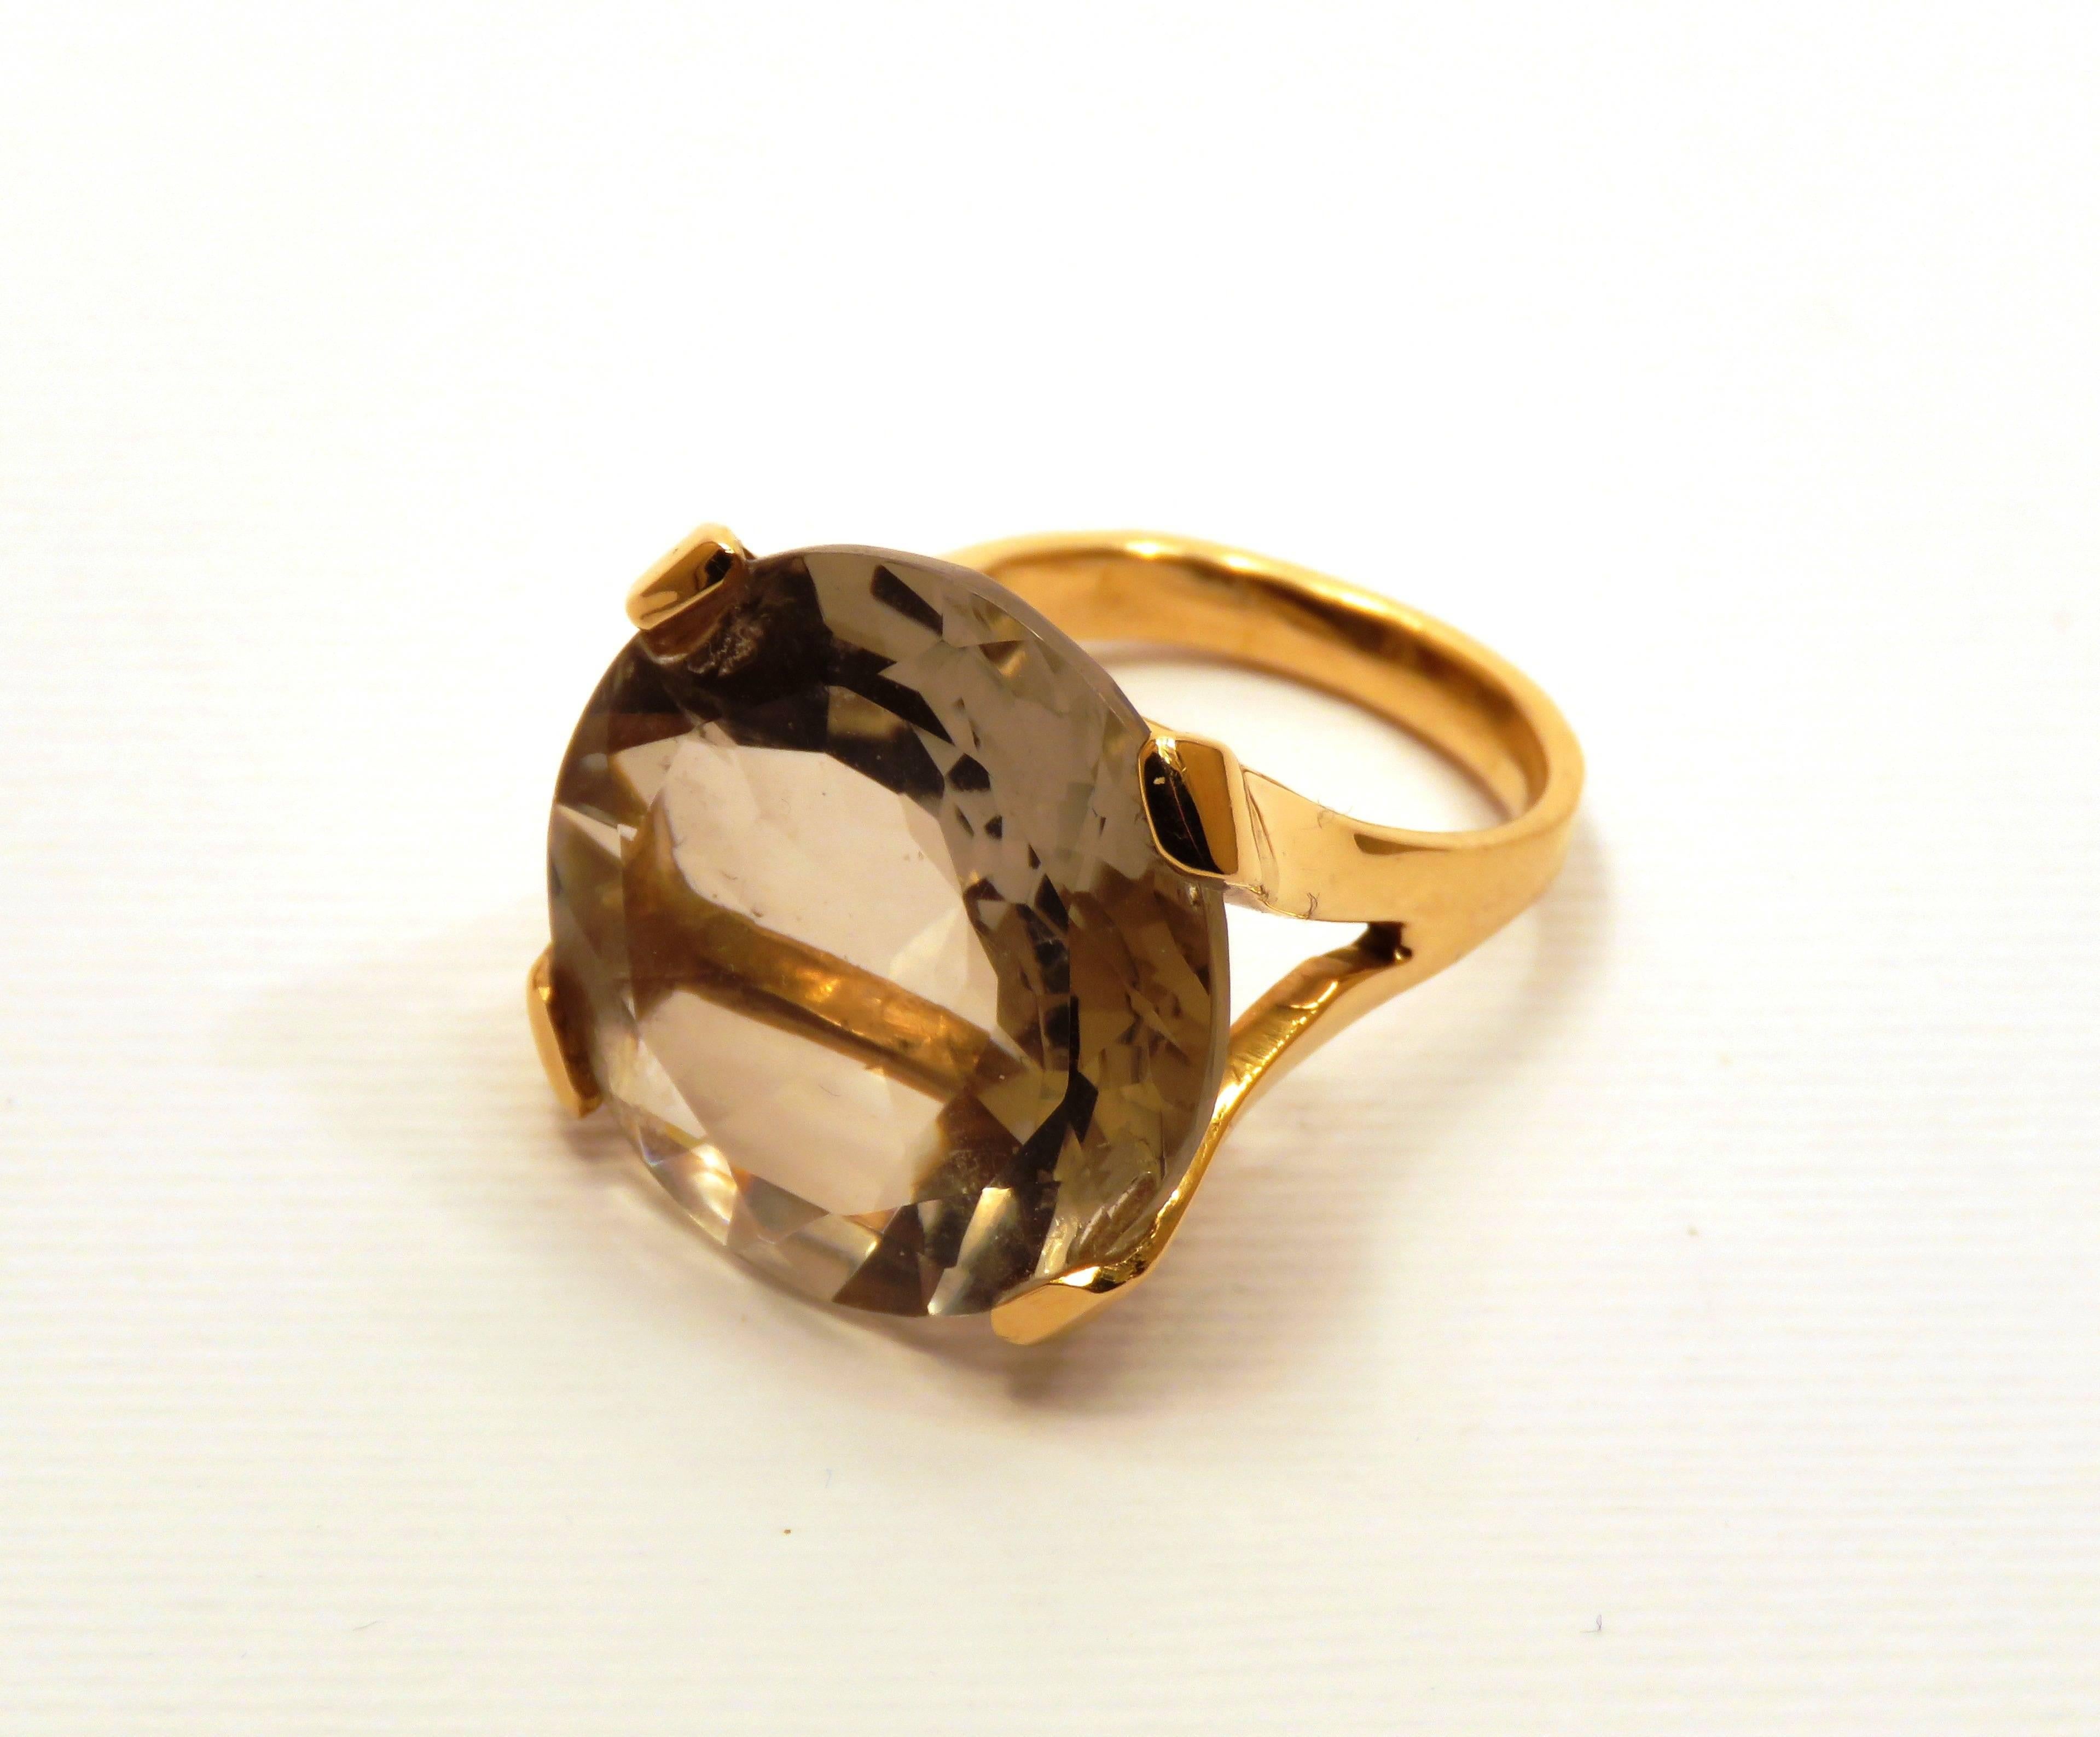 Modern Cocktail Ring Rose 18k Gold with Grey Topaz or Rock Crystal.
Stone mm. 20 / inches 0.787
US size 6 / ITALIAN size 12 / FRENCH size 52 / can be sized.
It  is stamped with the Italian Mark 750 - 716MI
Ready for delivery. It can be shipped with